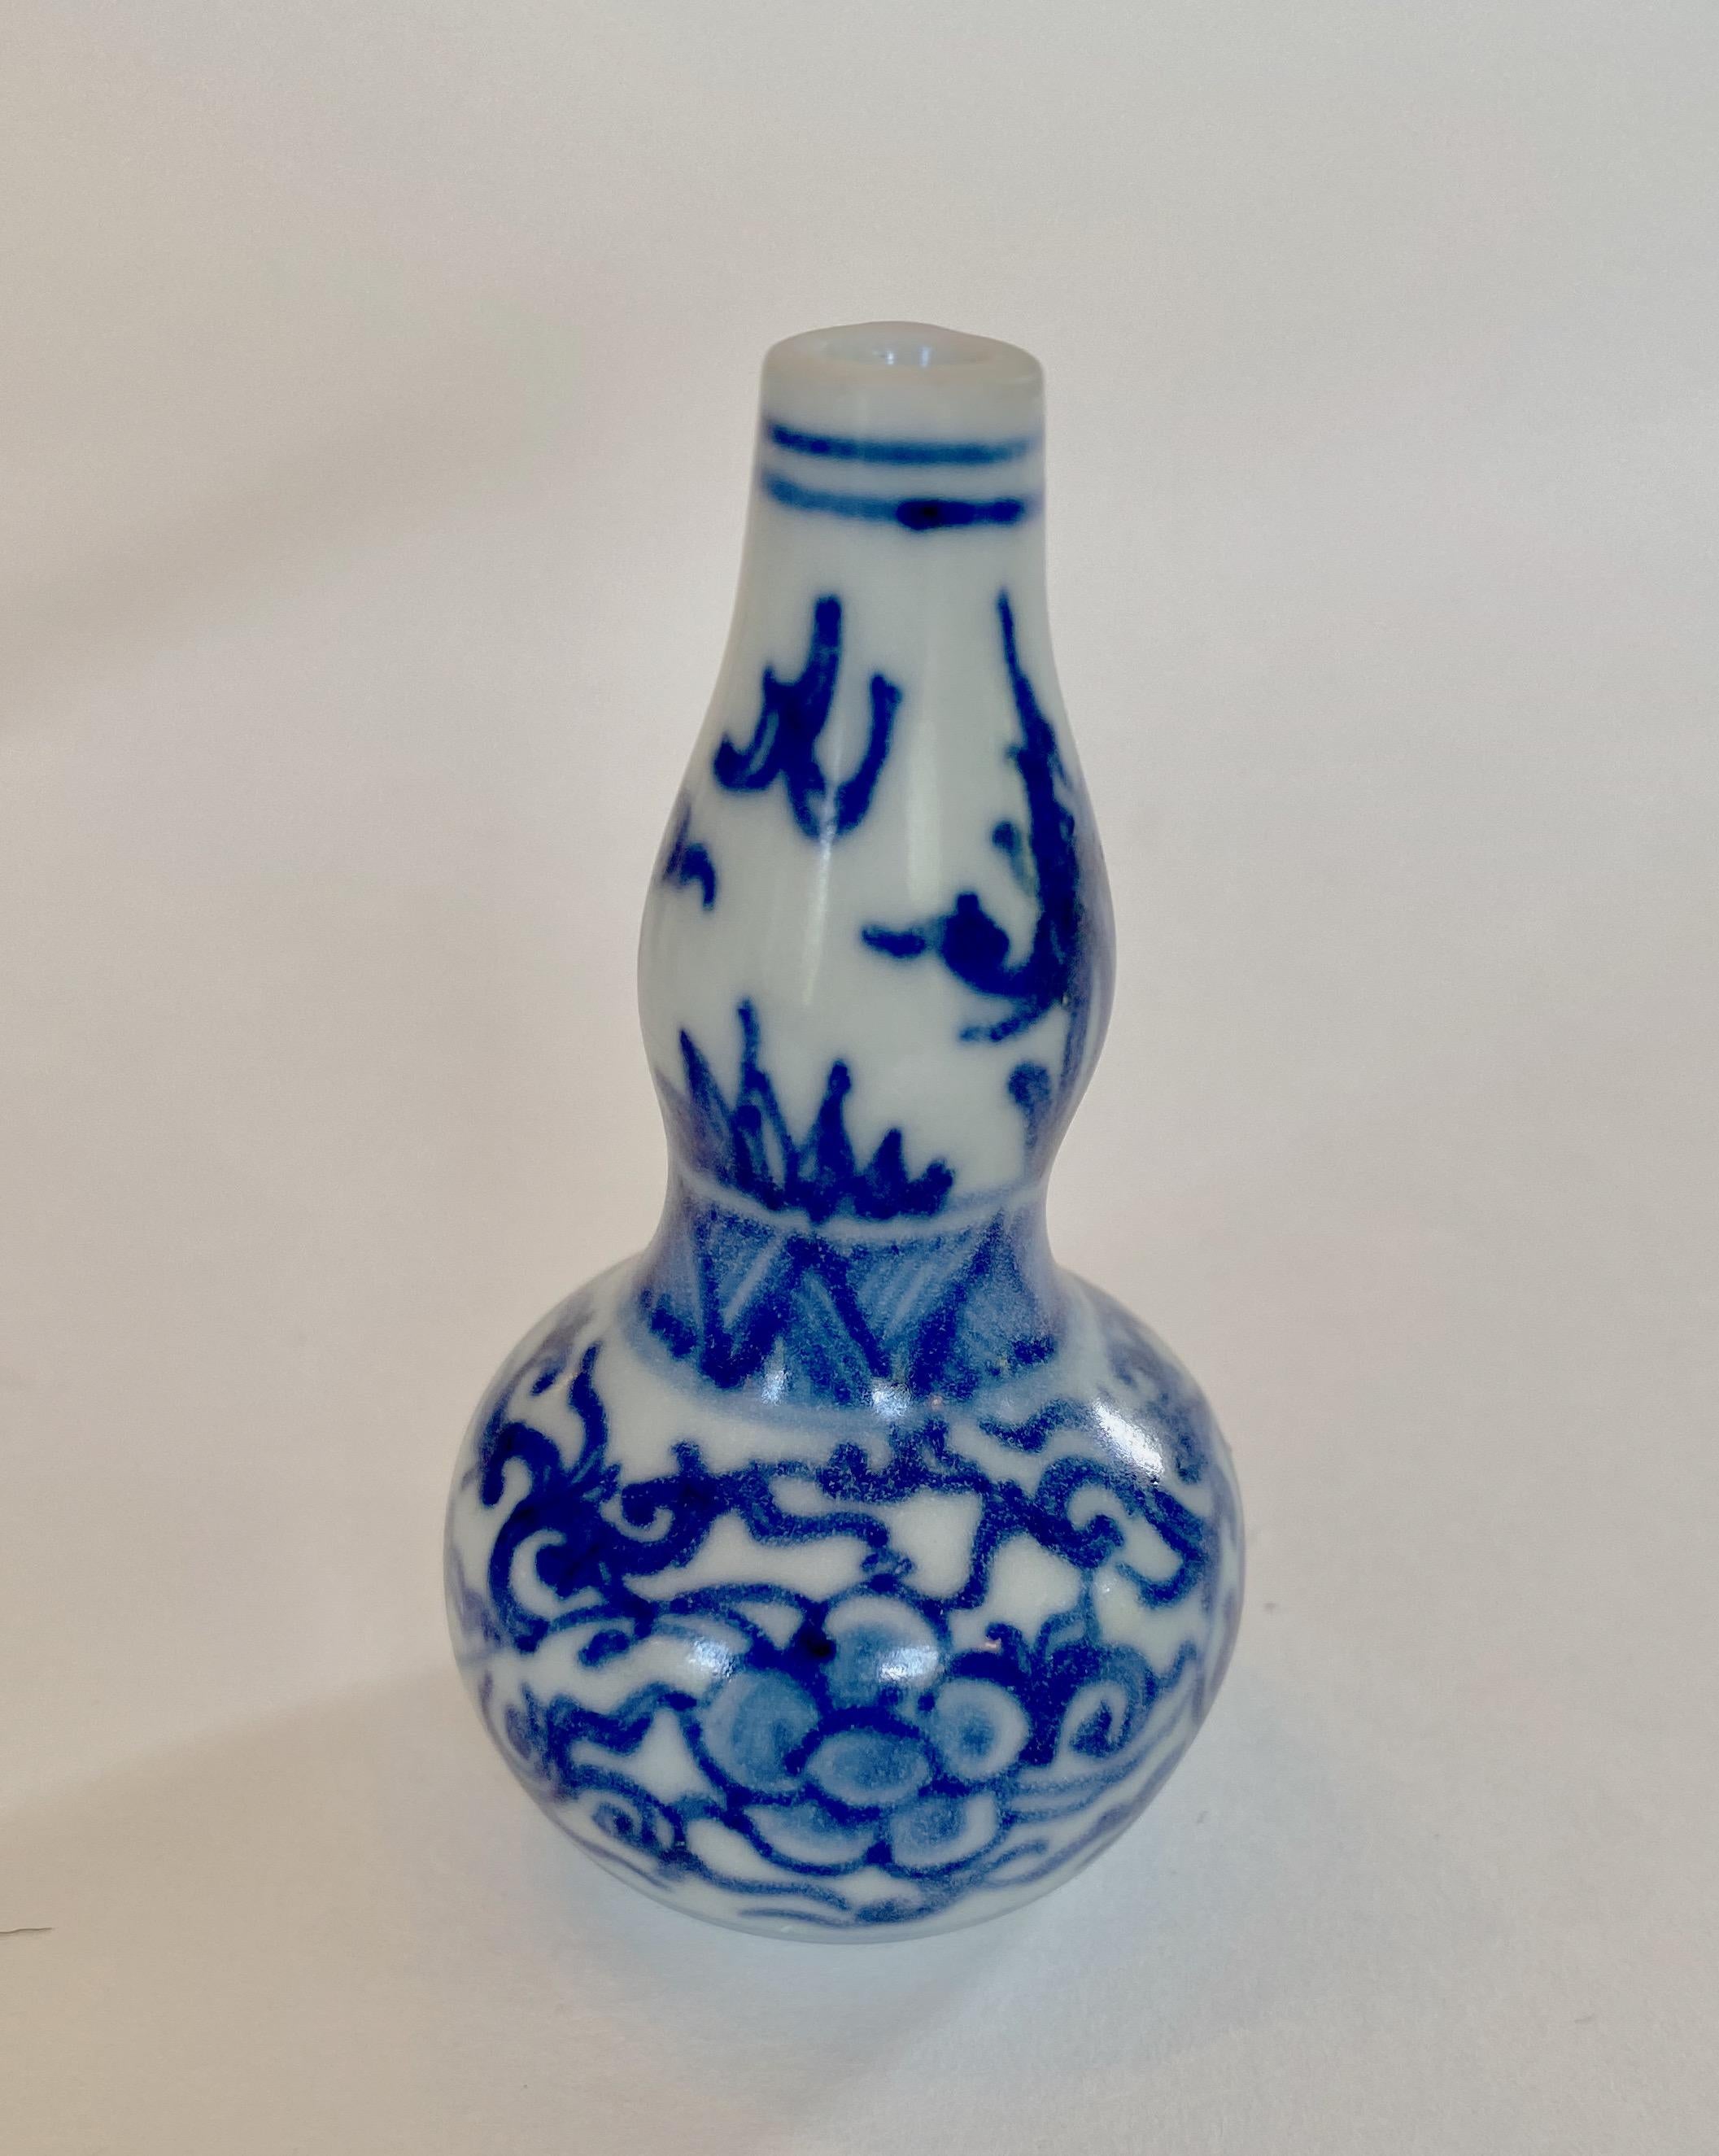 Miniature 17th century blue and white double gourd vase. 
This miniature vase was part of a hoard recovered by Captain Michael Hatcher from the wreck of a ship that sunk in the South China sea in approximately 1643. Approximately 25,000 pieces from